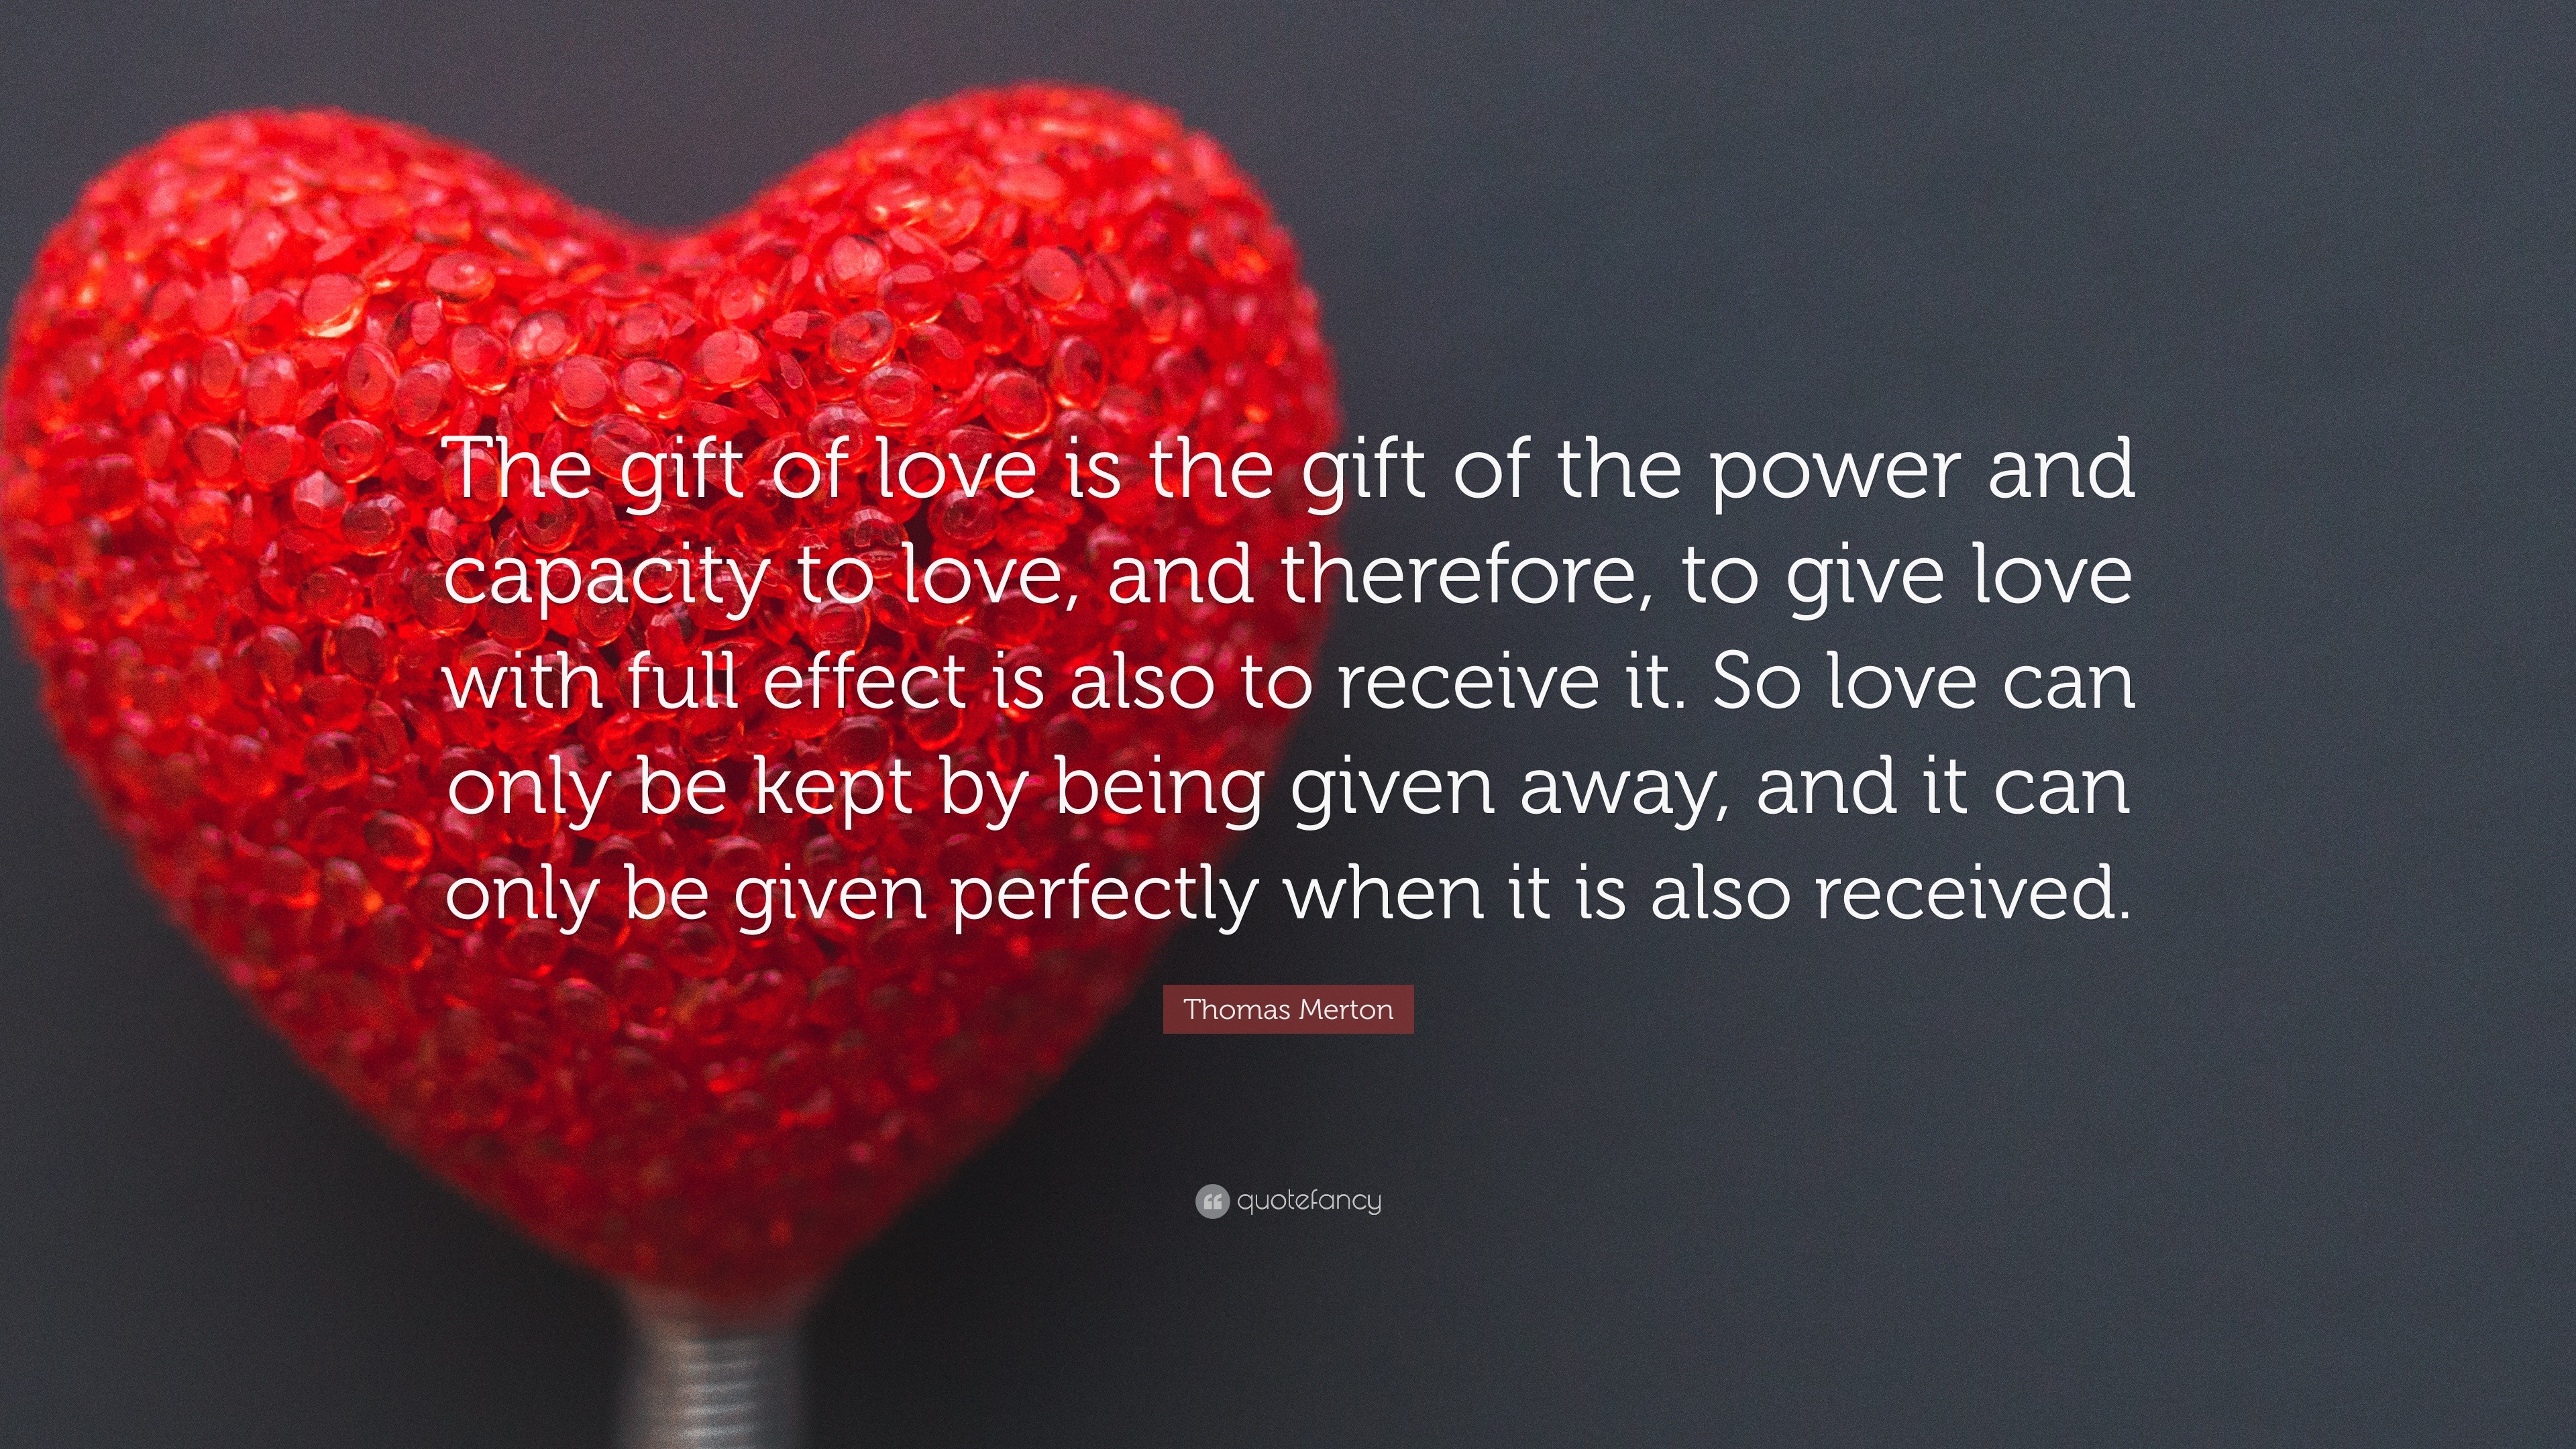 Thomas Merton Quote: “The gift of love is the gift of the power and  capacity to love, and therefore, to give love with full effect is also to  ”